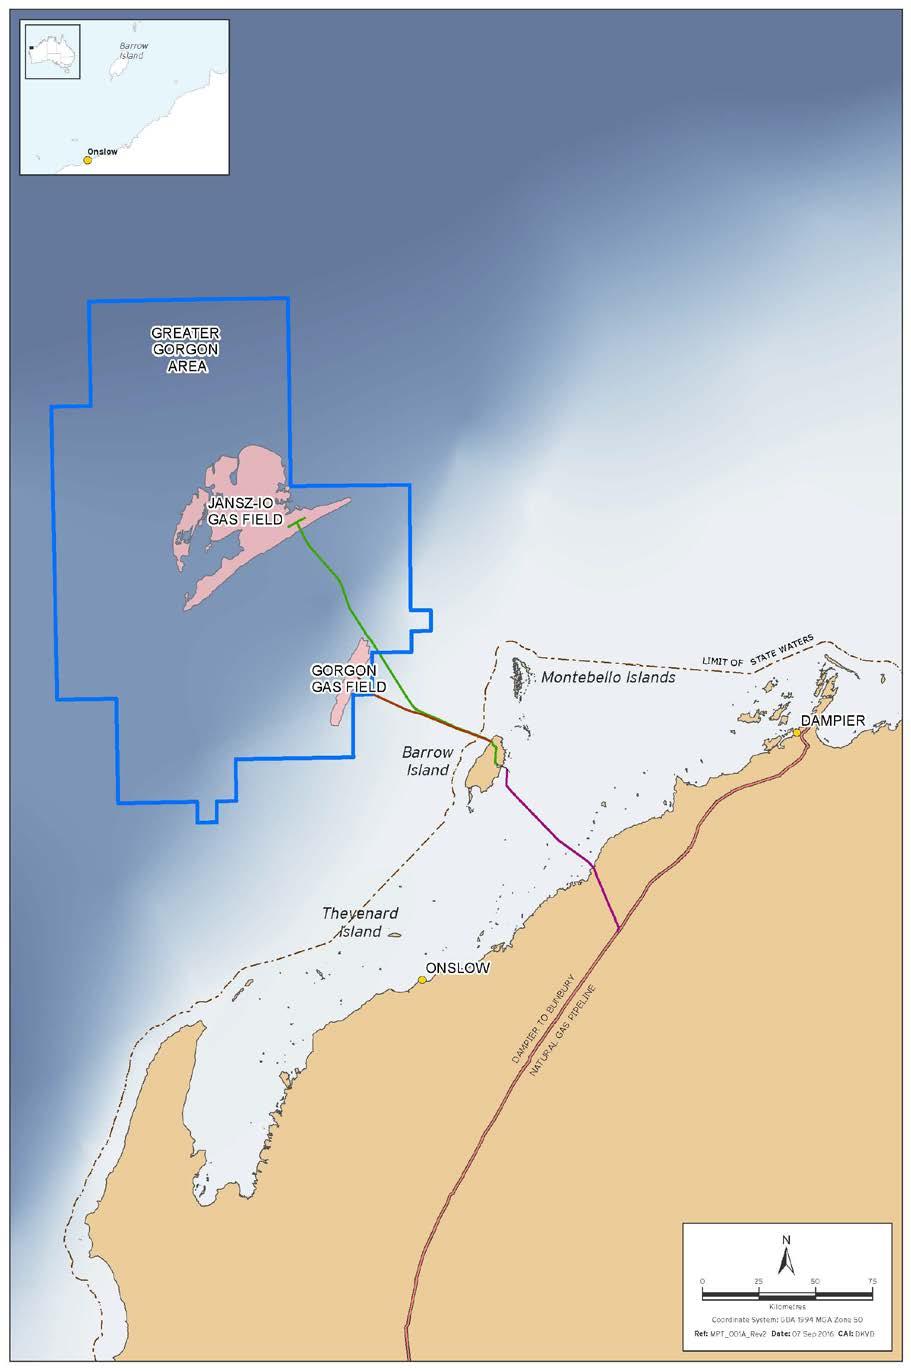 Figure 1-1: Location of Barrow Island and the Greater